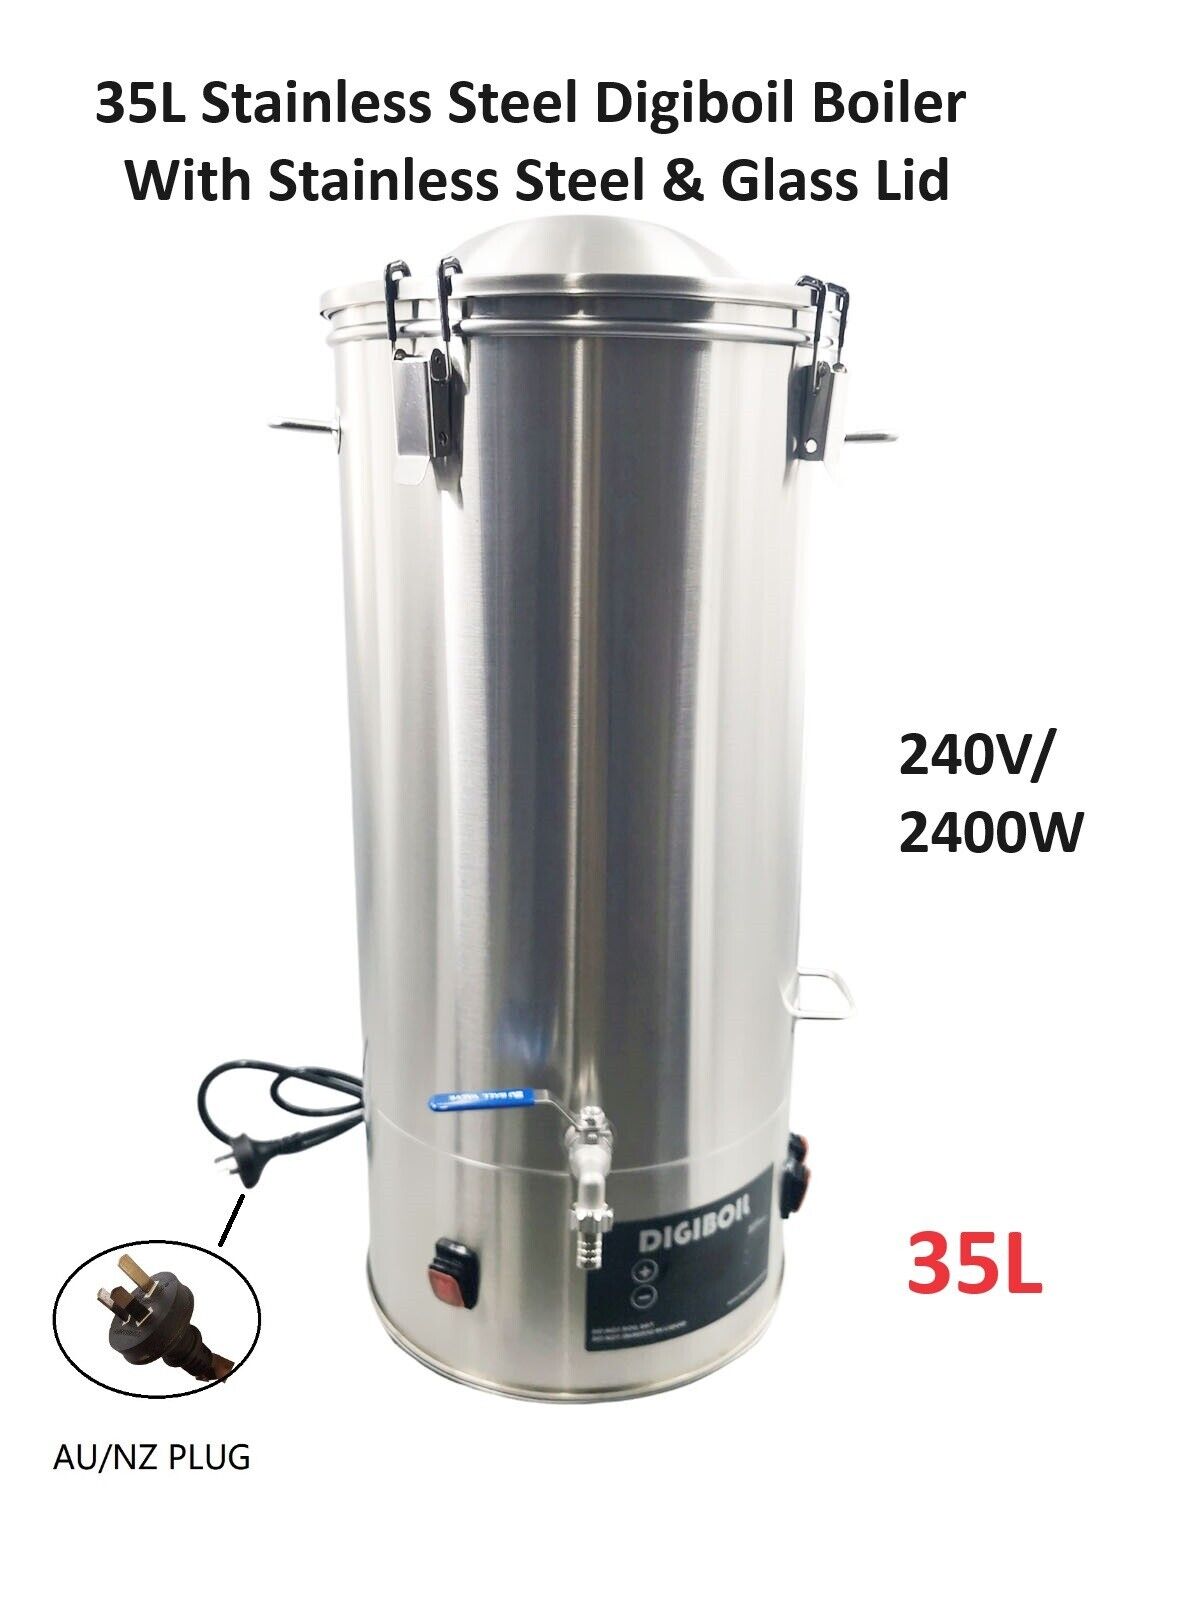 35L/240V/2400W Stainless Steel Digiboil Boiler W/T Stainless Steel & Glass Lid